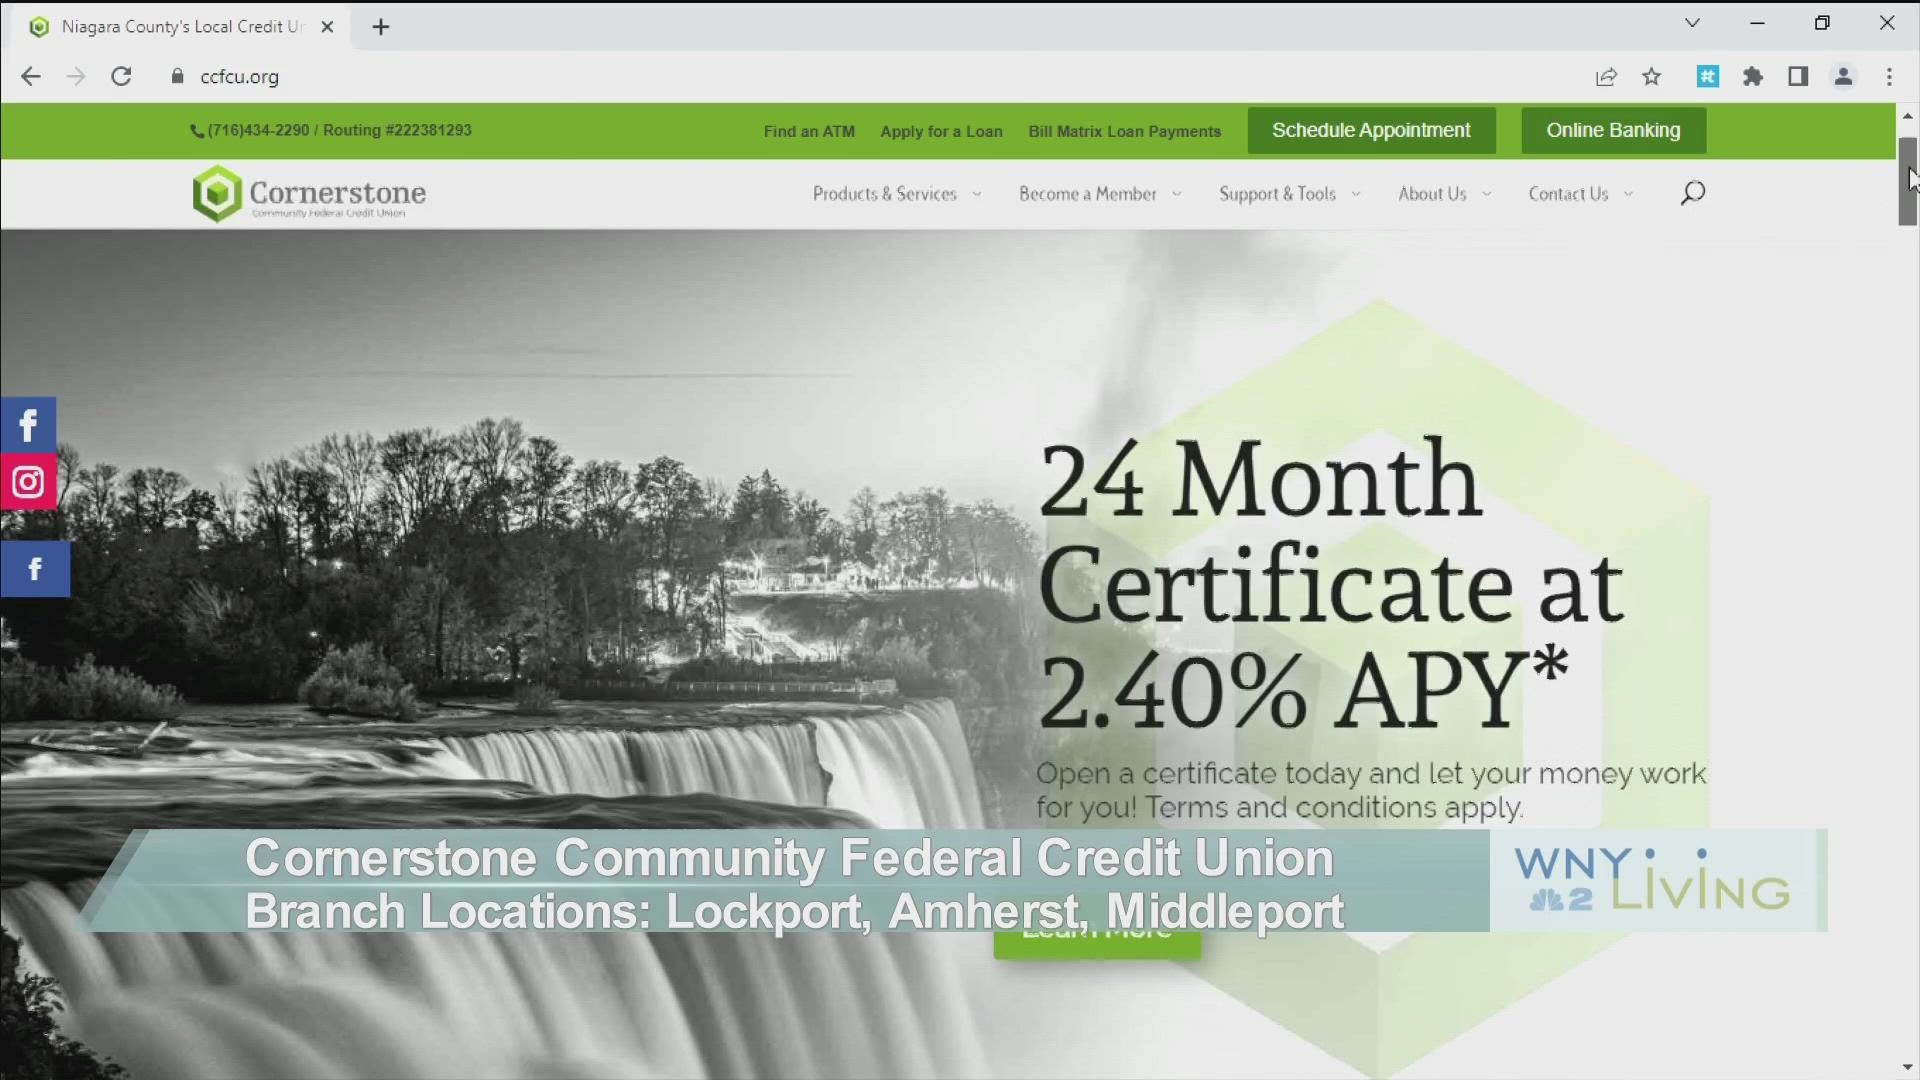 WNY Living - March 4 - Cornerstone Community Federal Credit Union (THIS VIDEO IS SPONSORED BY CORNERSTONE COMMUNITY FEDERAL CREDIT UNION)